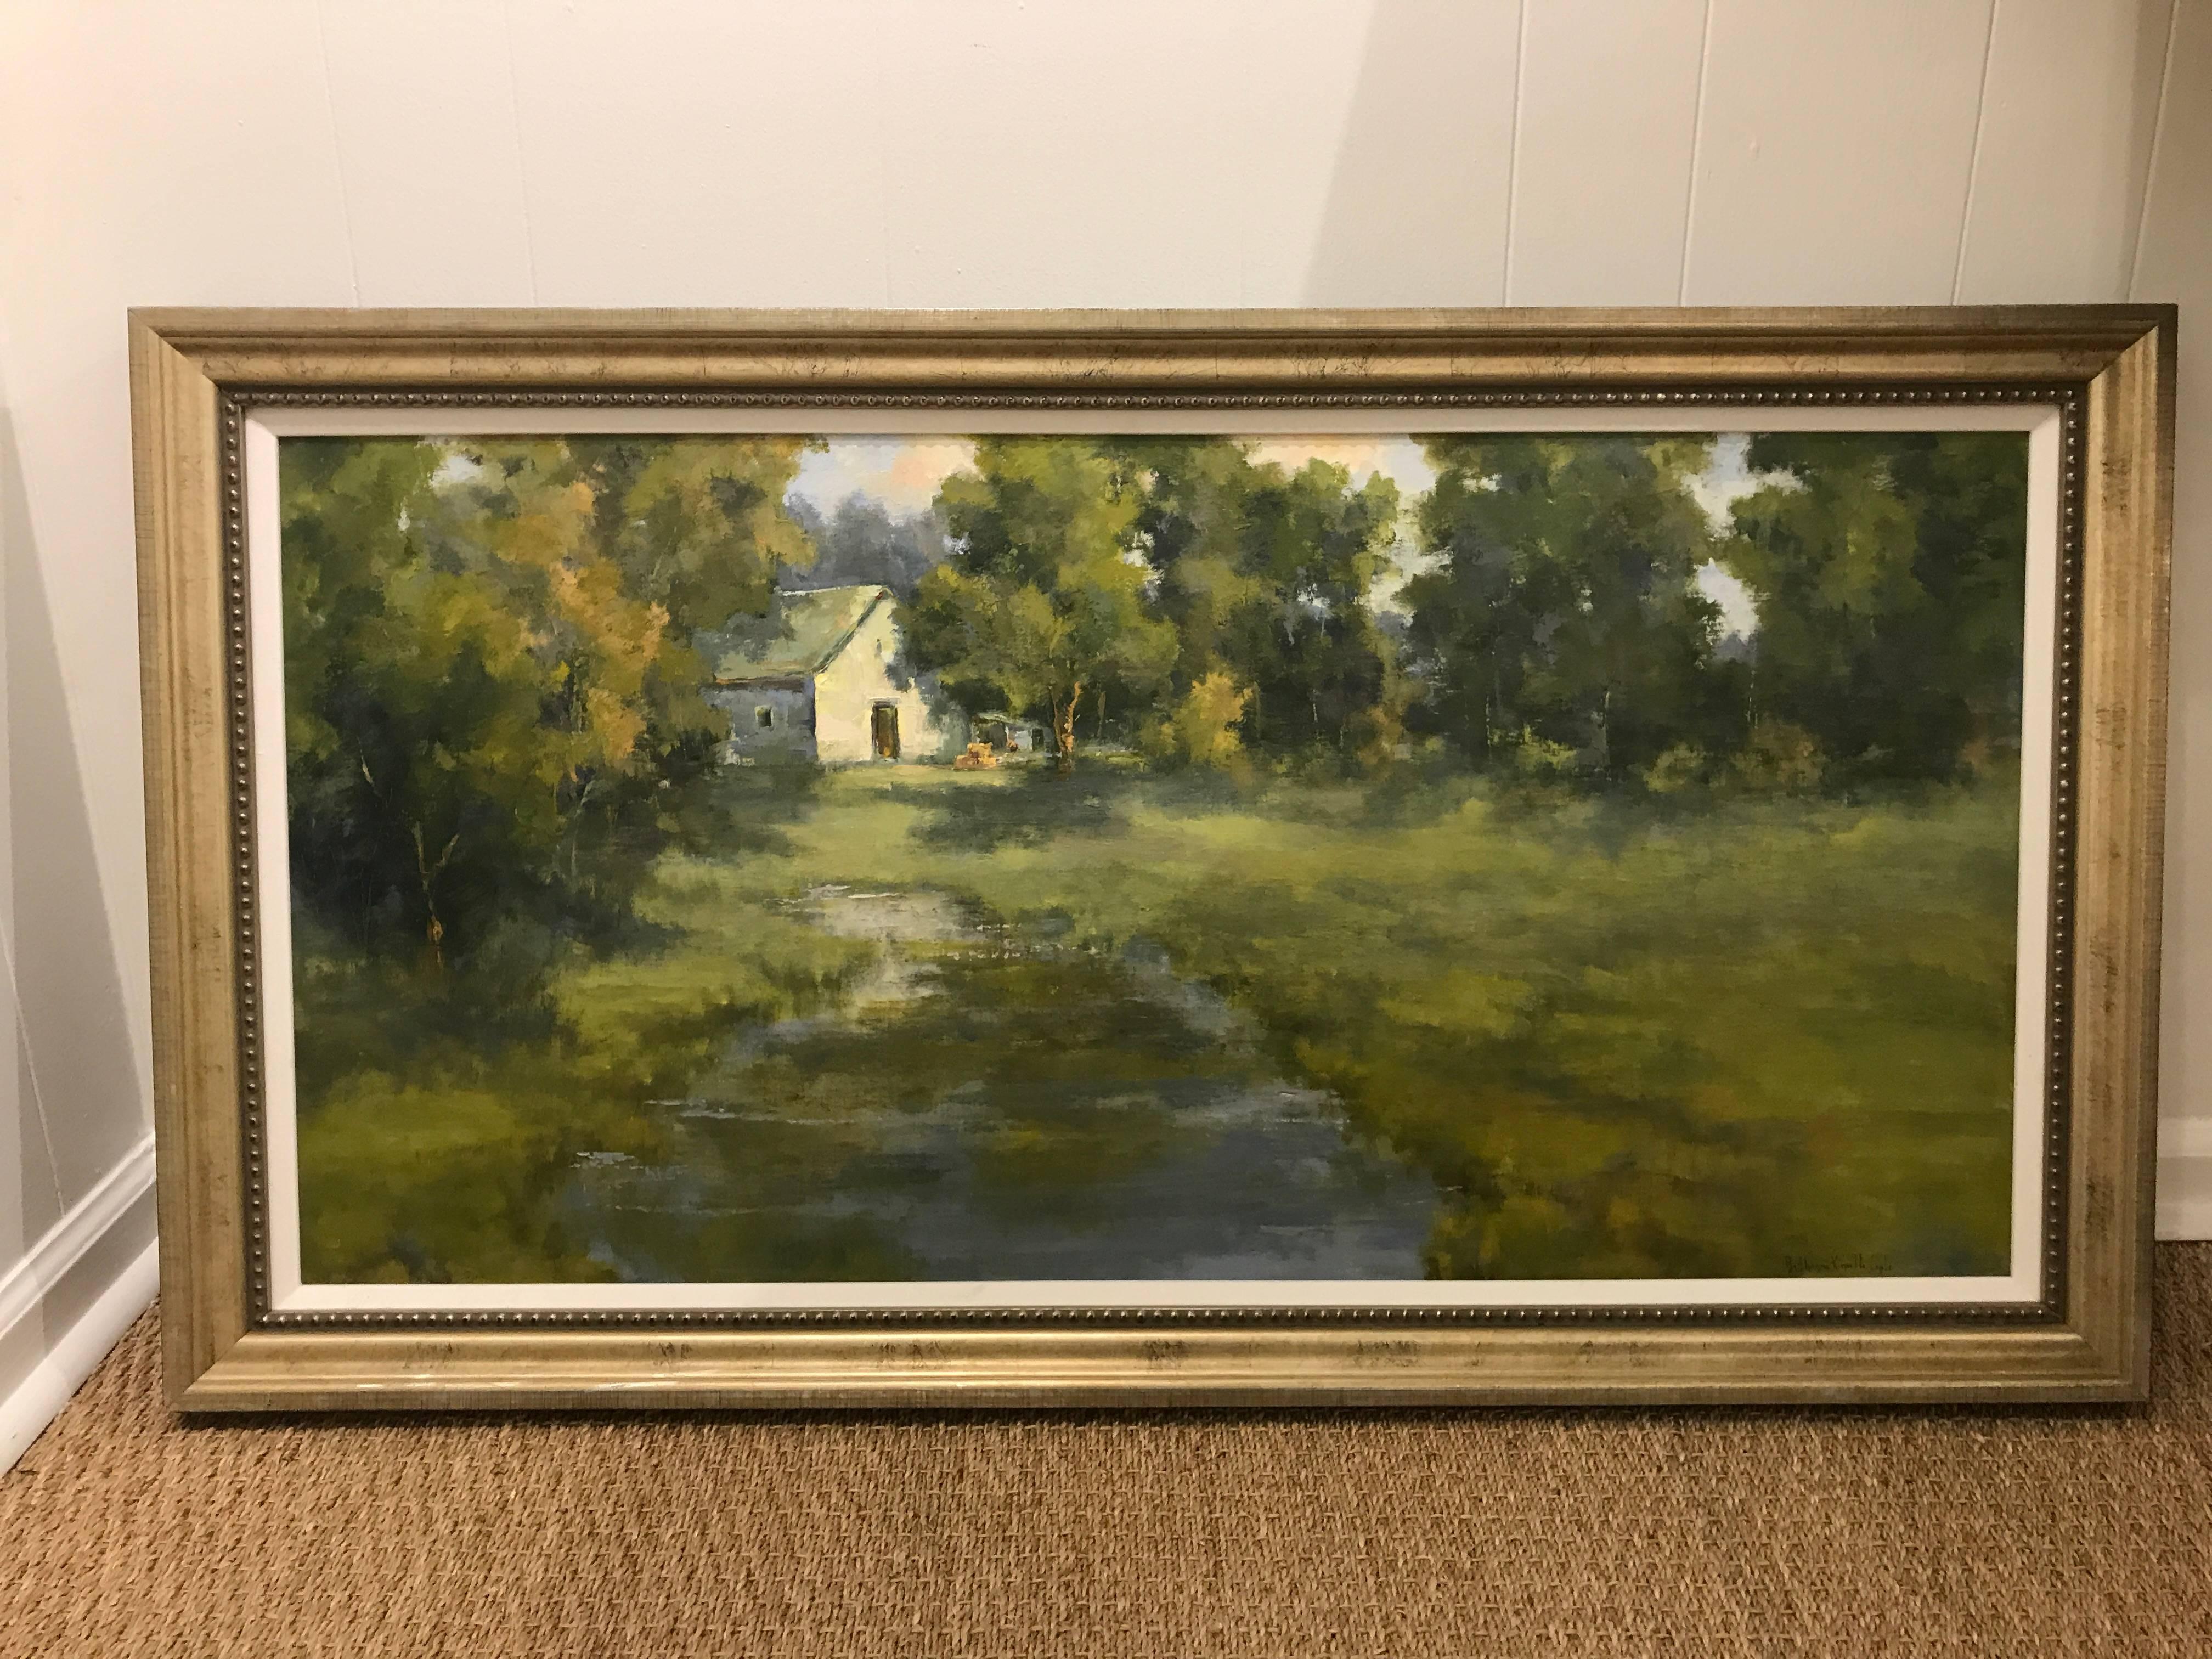 White Barn, Cool River - Painting by Bethanne Kinsella Cople